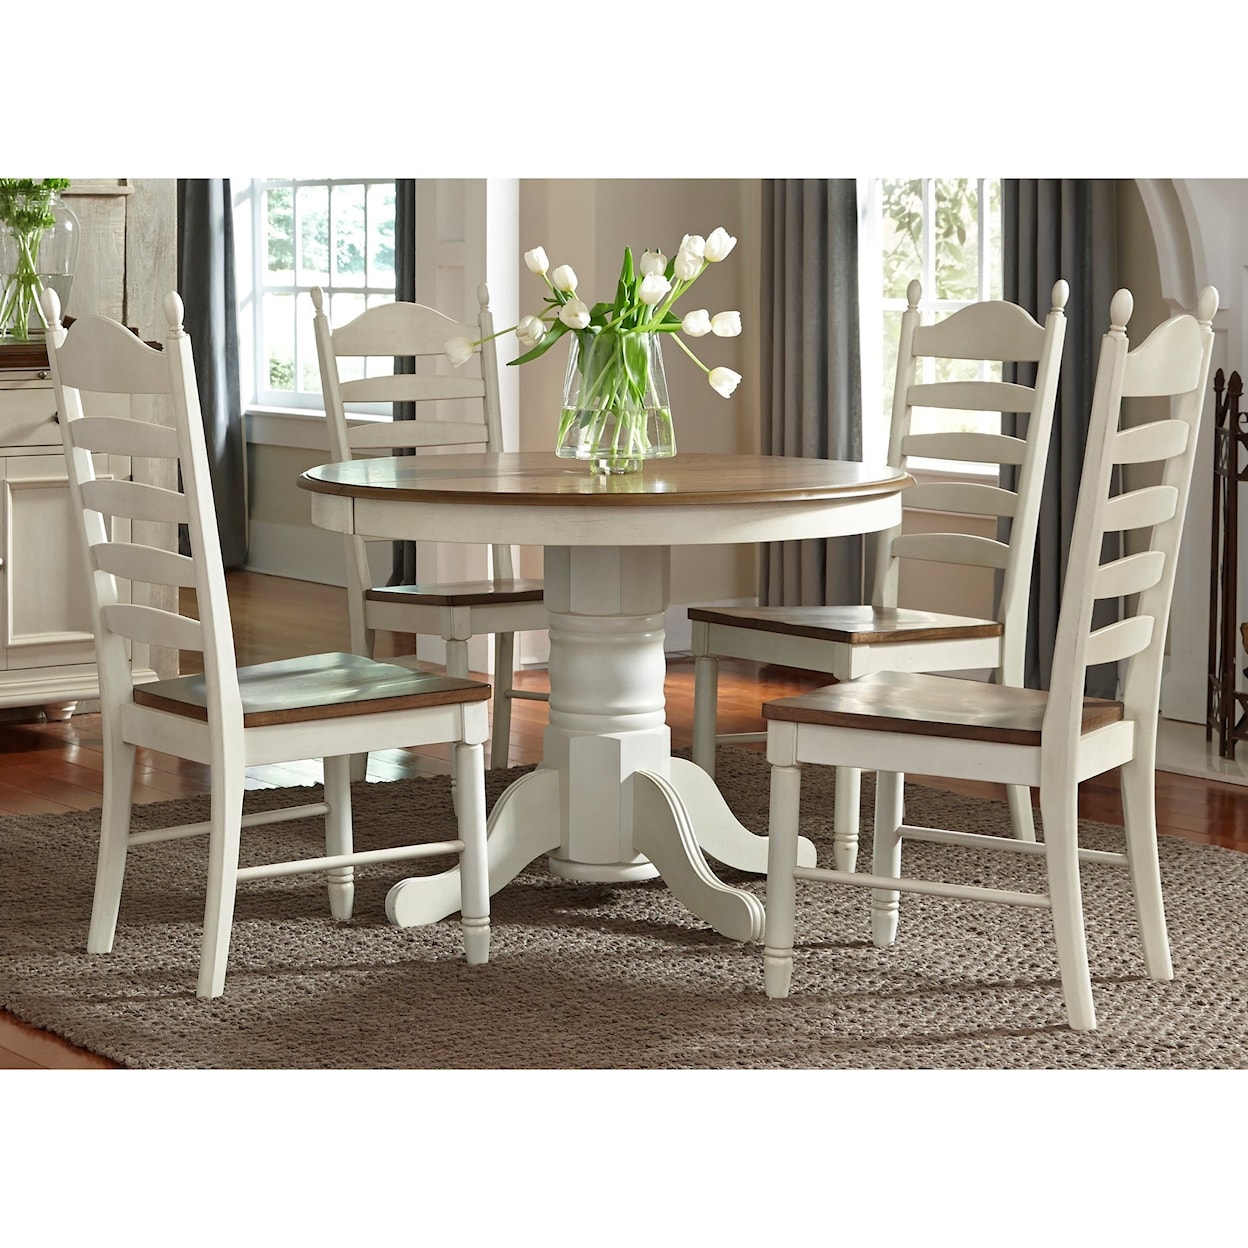 Libby Springfield Dining 5-Piece Round Pedestal Table Dining Set